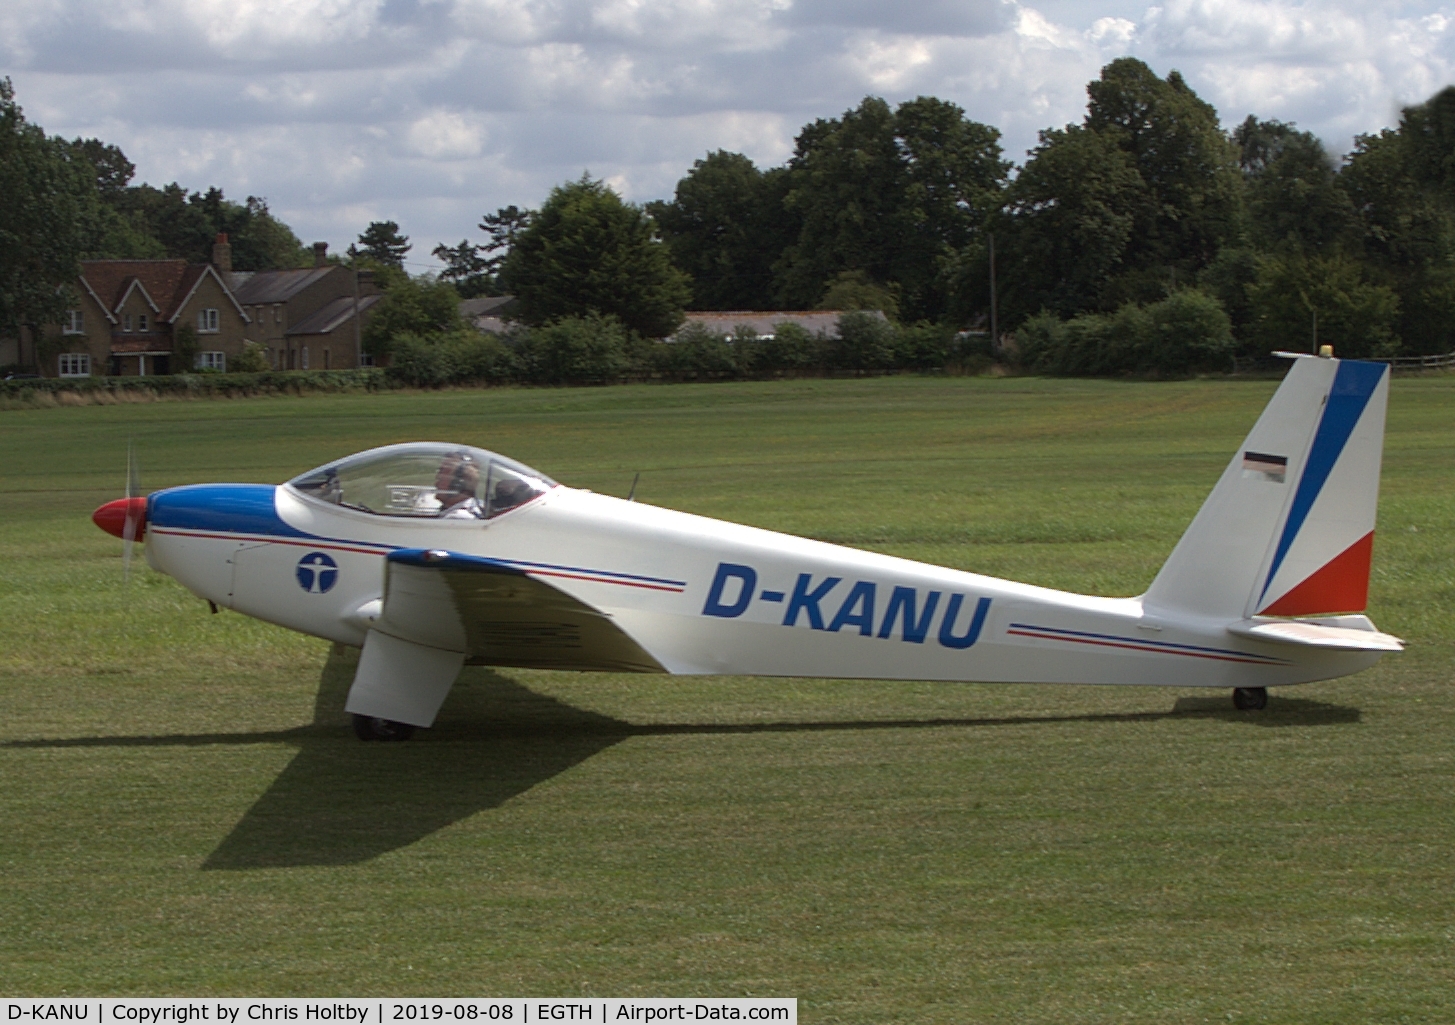 D-KANU, Schleicher ASK-16 C/N 16023, Landed during the Gathering of Moths Day 2019 at Old Warden (regular visitor to this annual event)